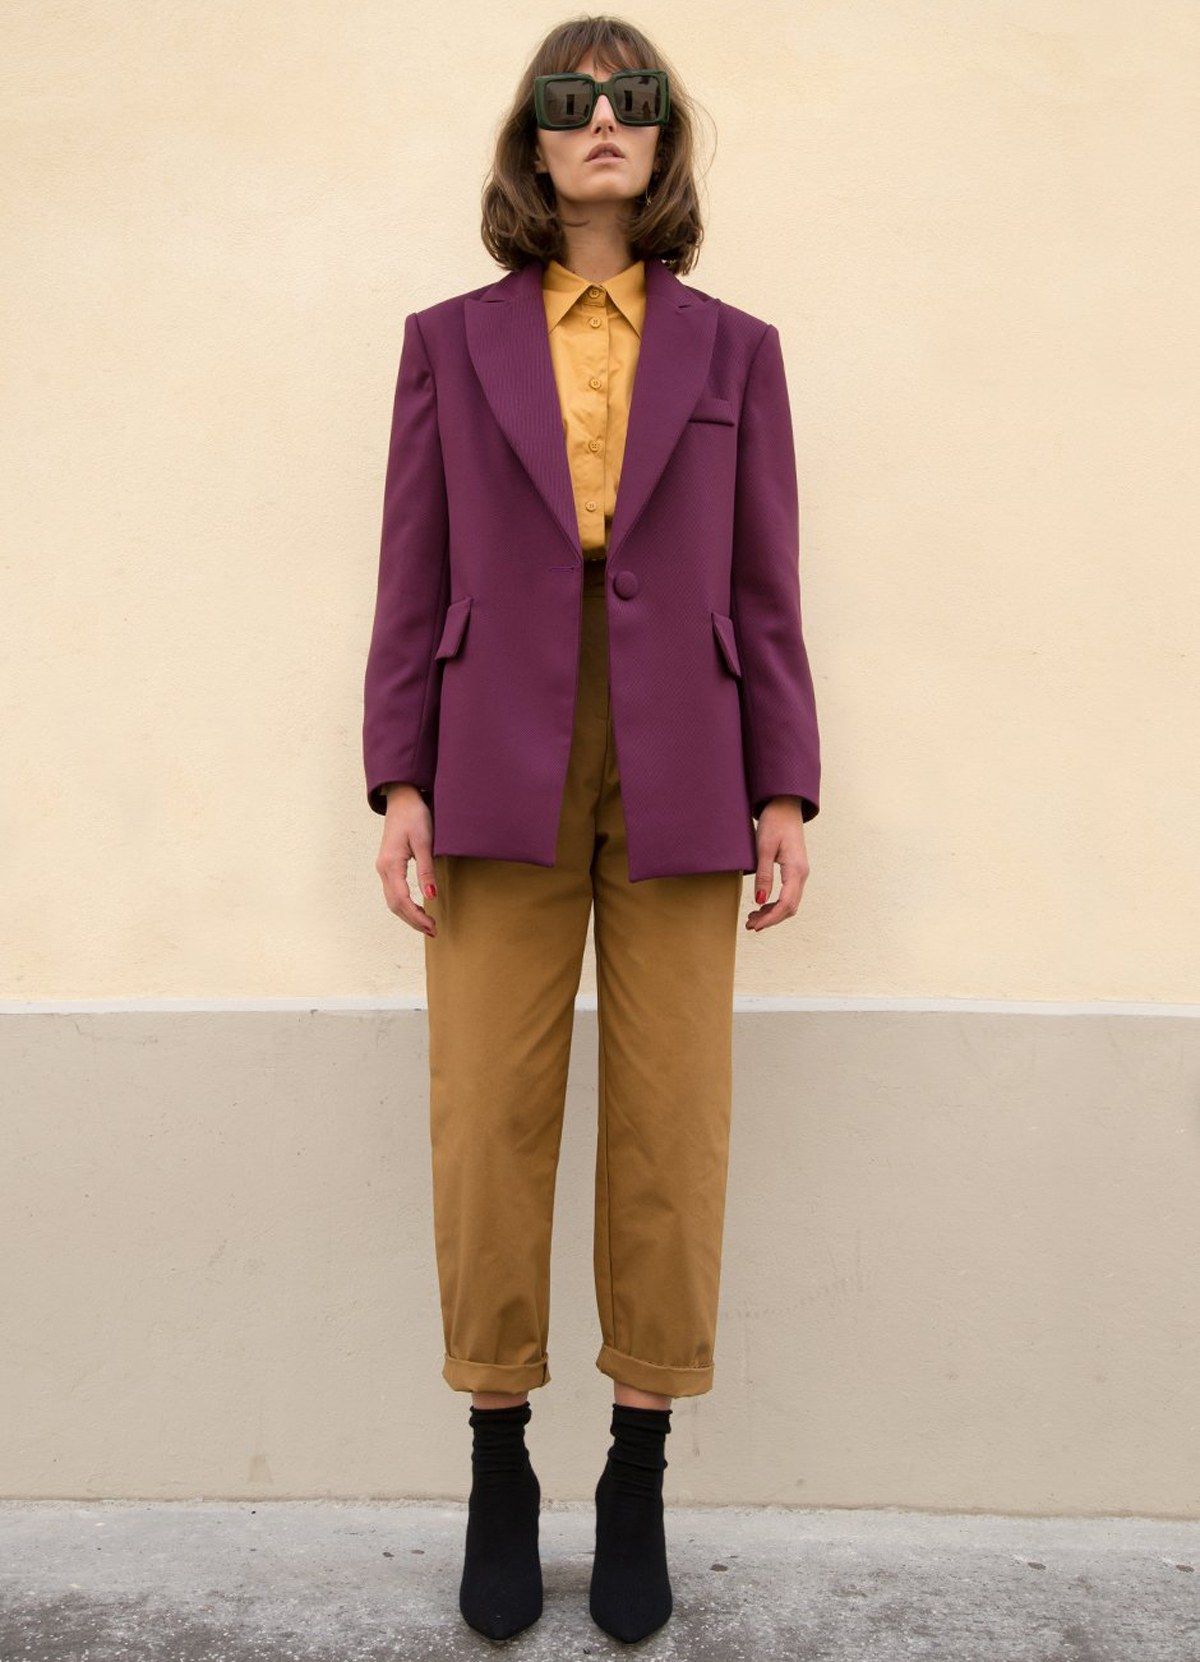 Purple Blazers: Adding a Splash of Regal Sophistication to Your Look